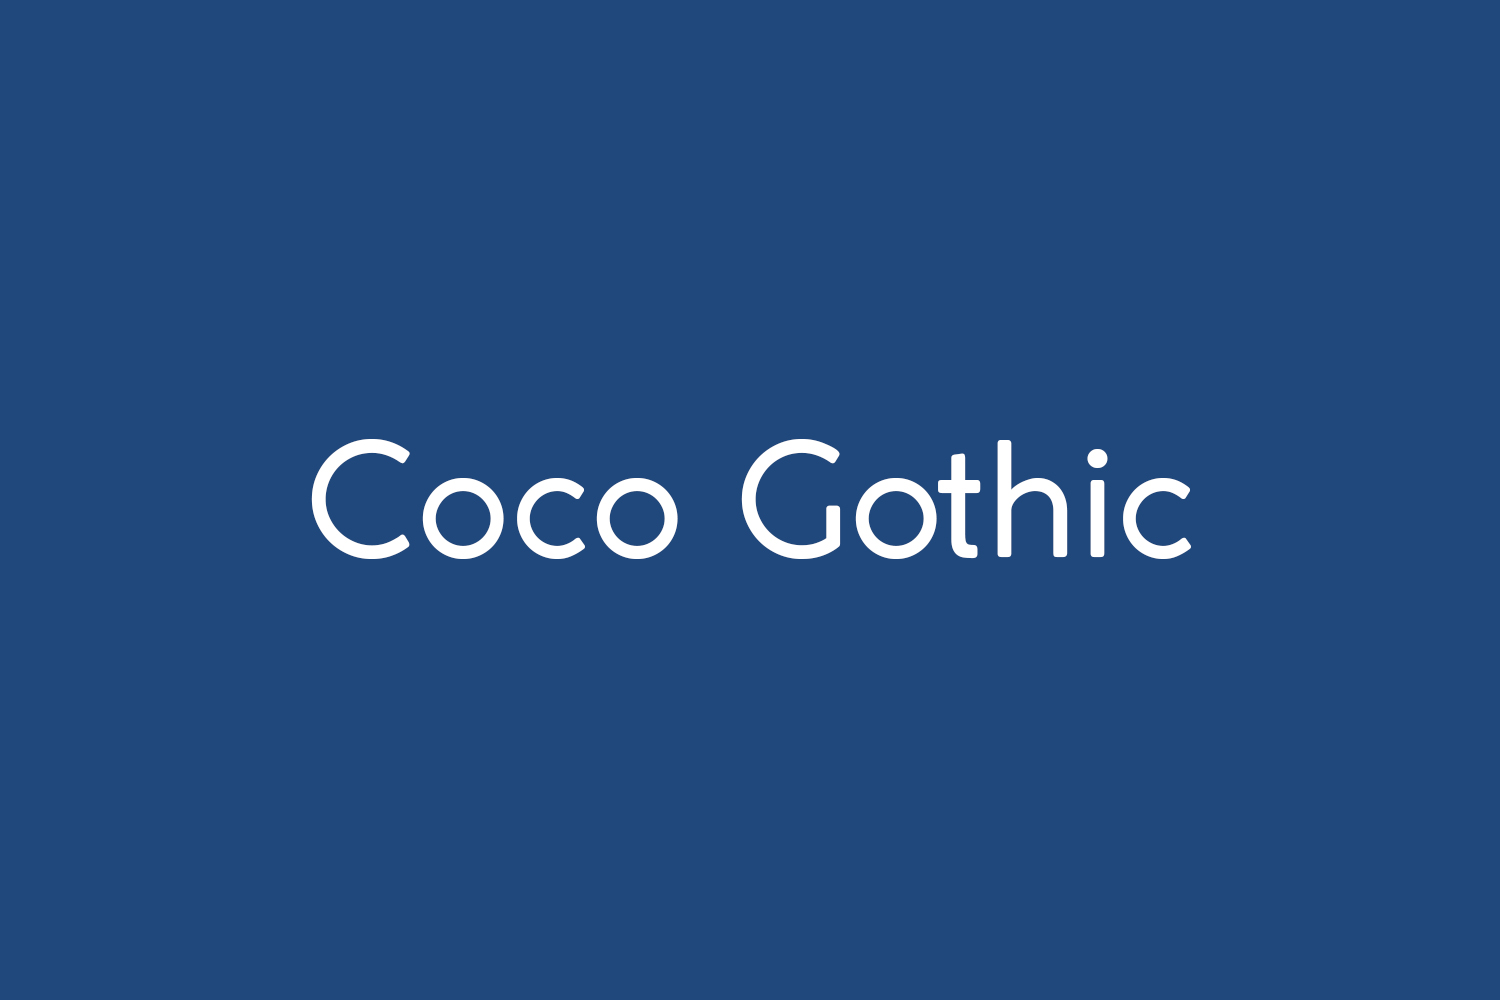 Coco Gothic Free Font